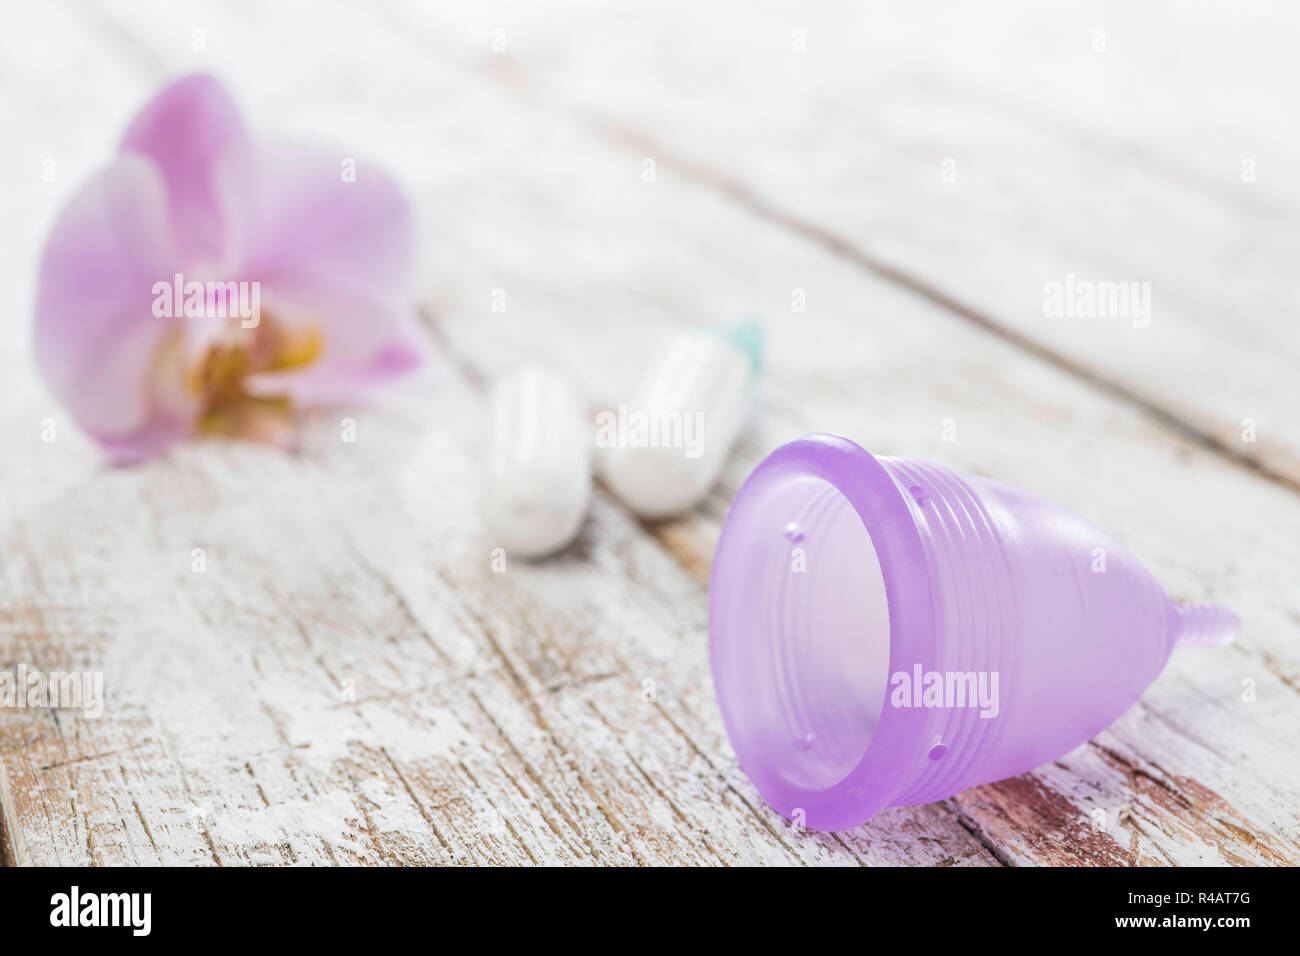 menstrual cup on an old wooden table withe white paint Stock Photo